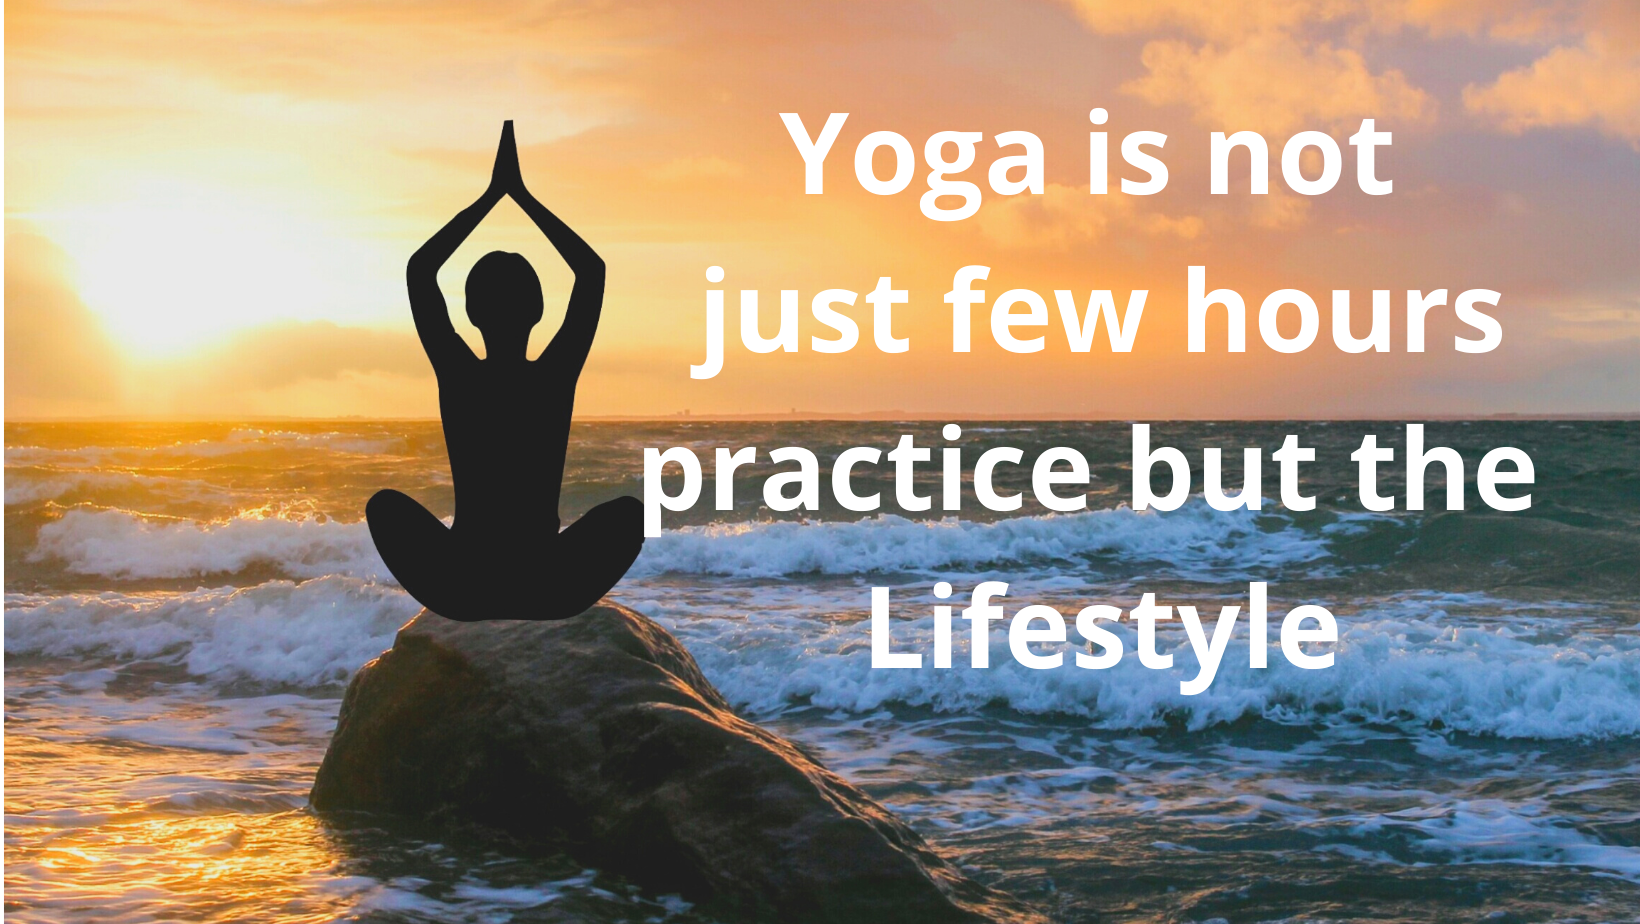 Yoga Lifestyle: Live Every Moment of Life - The Spiritual Oxygen